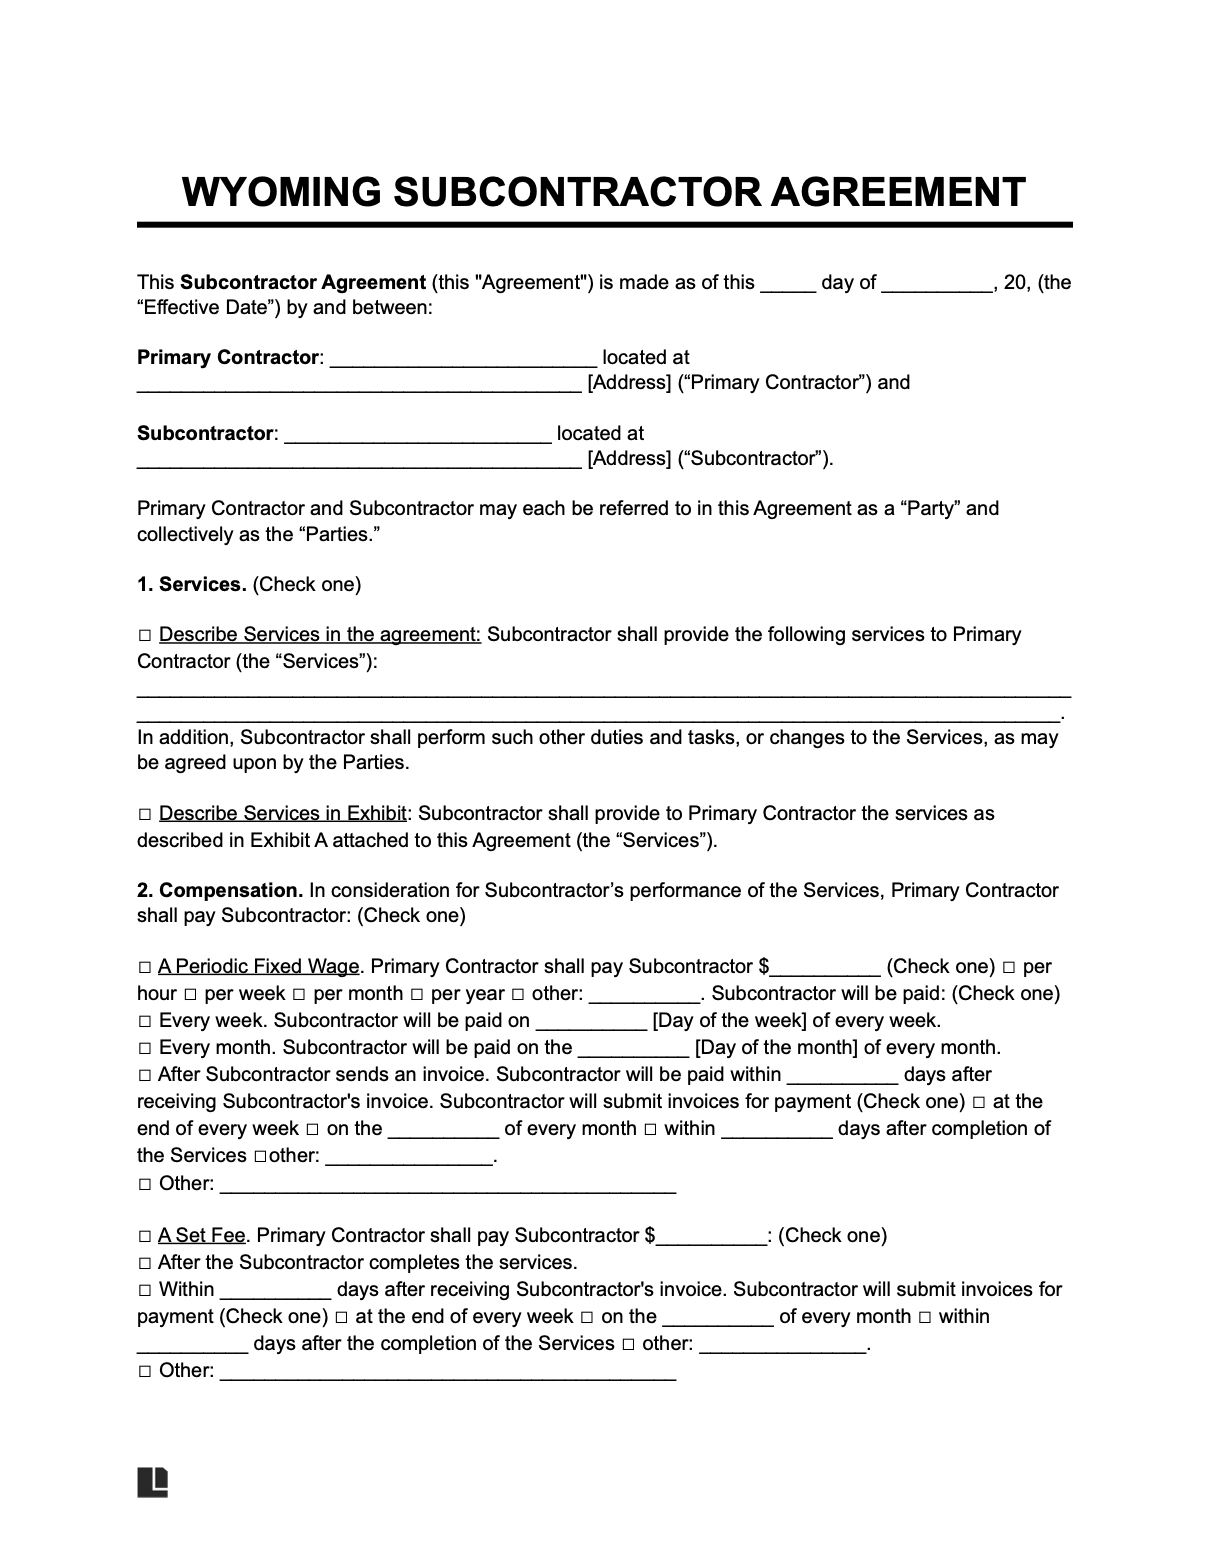 wyoming subcontractor agreement template